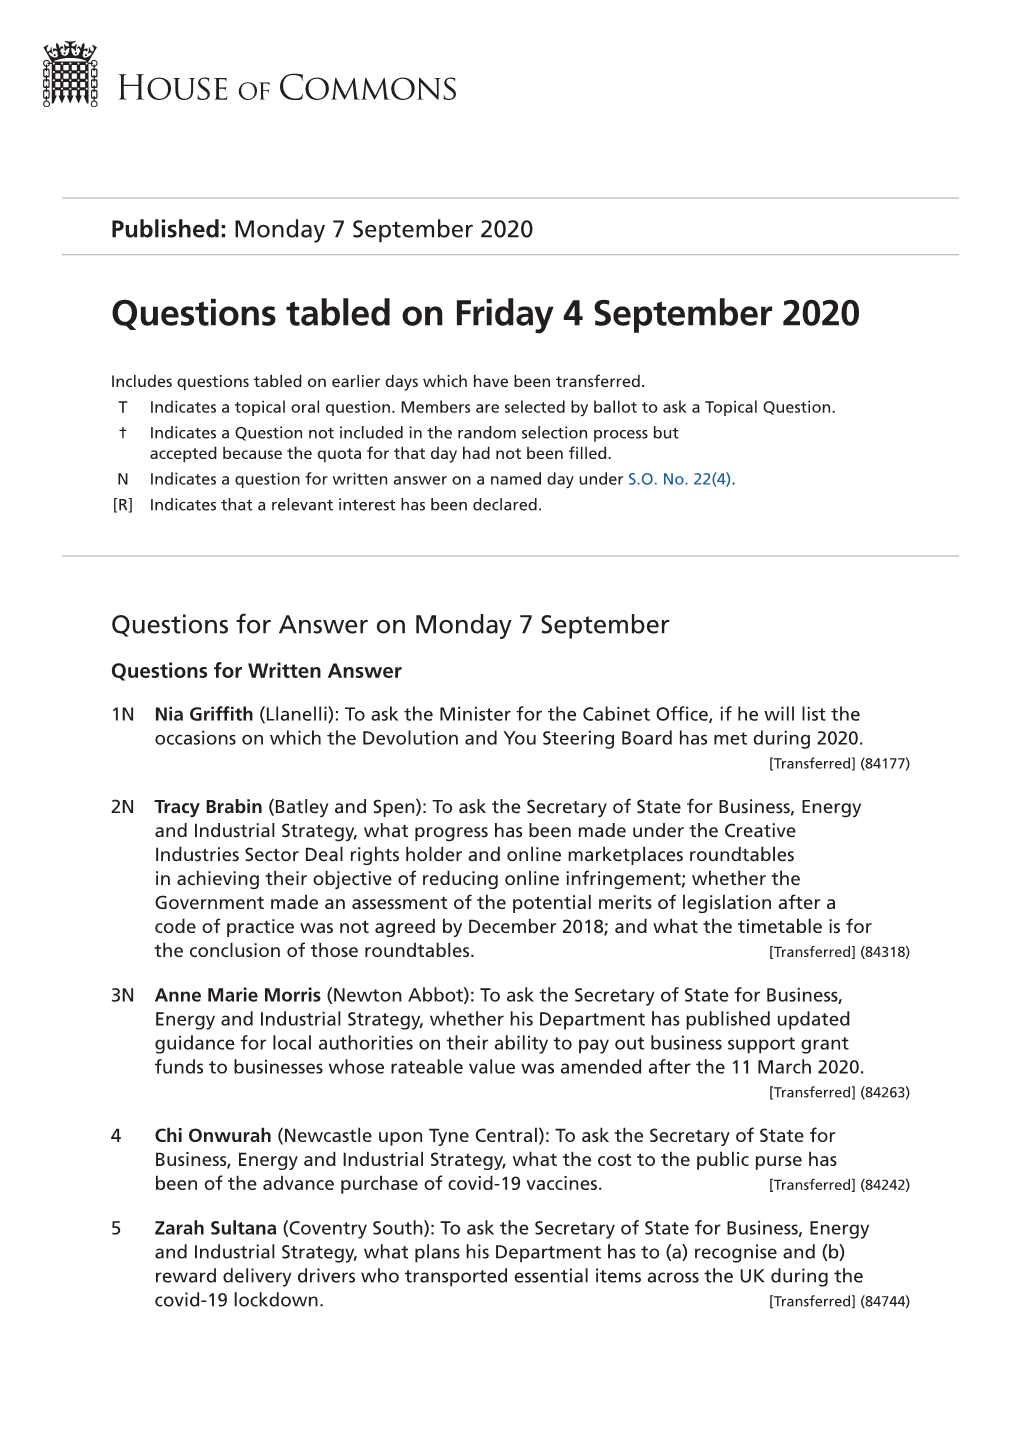 Questions Tabled on Fri 4 Sep 2020